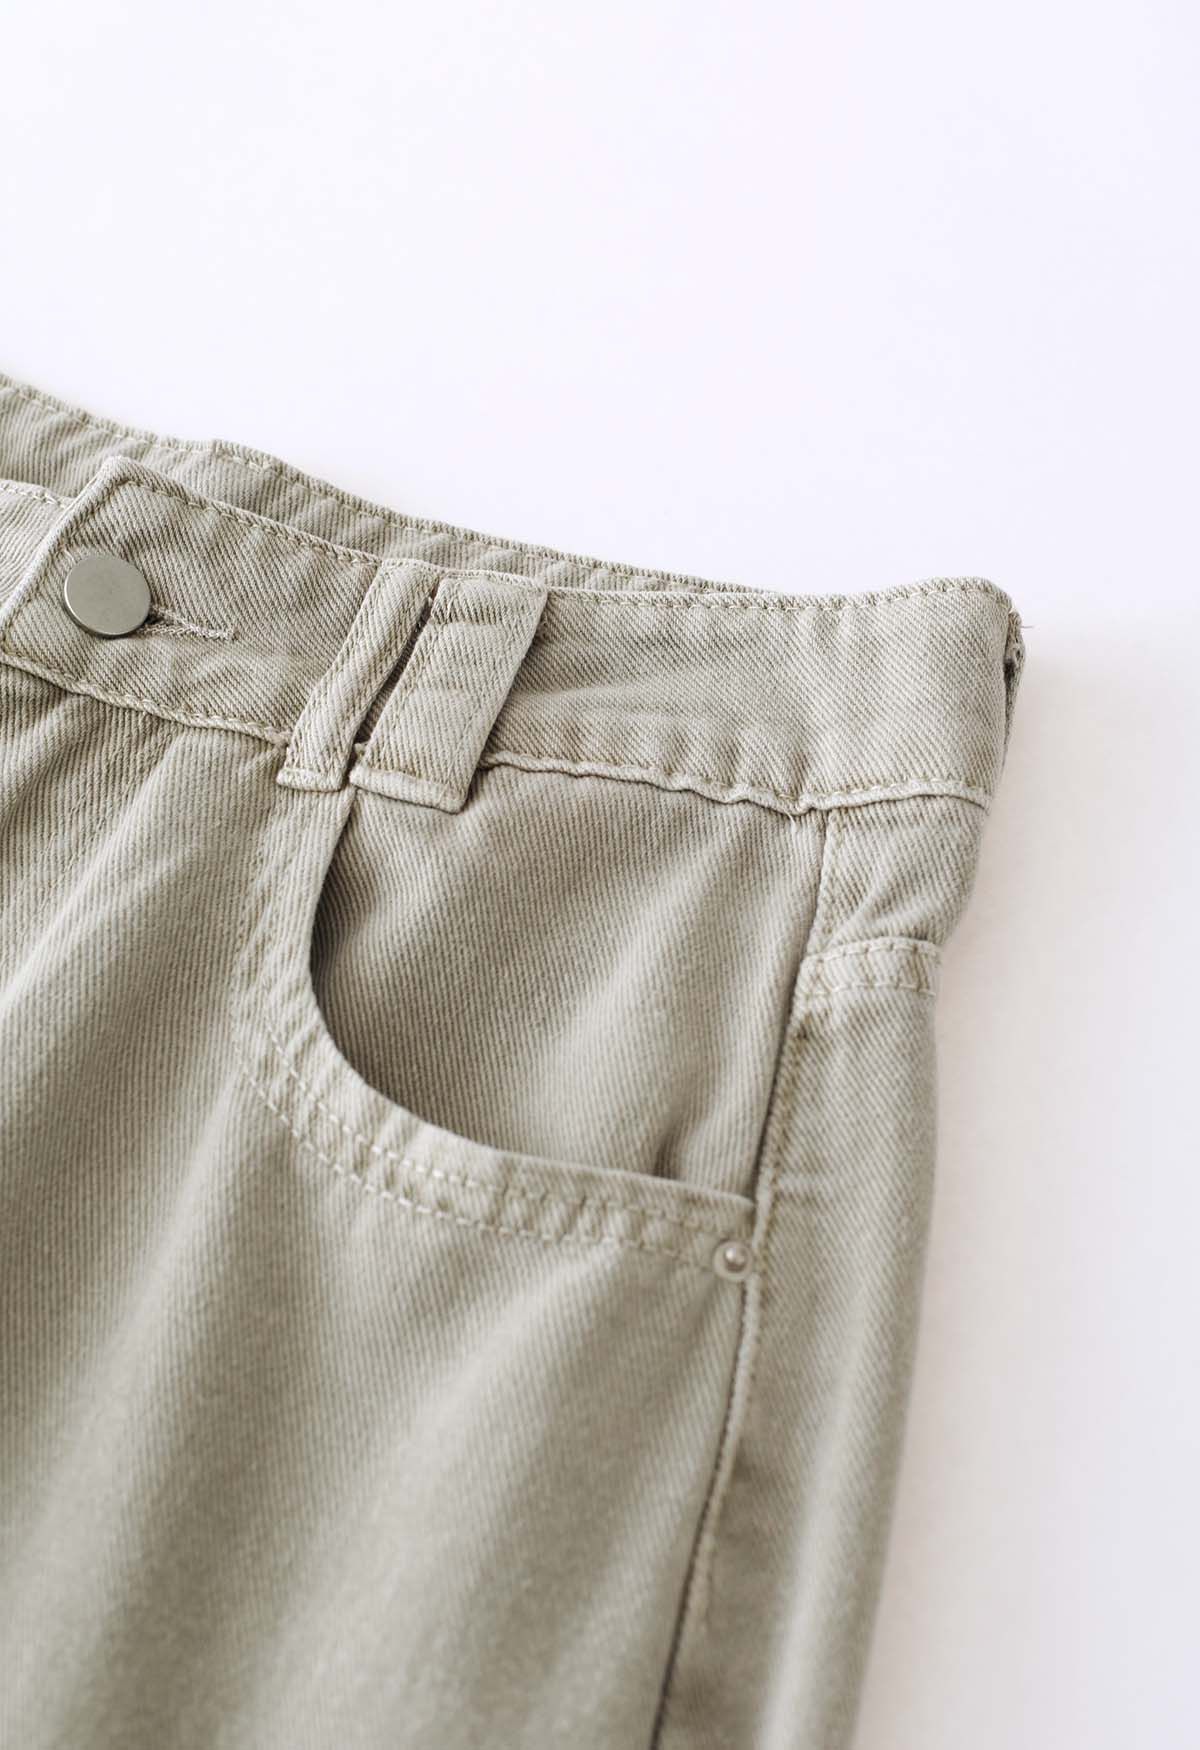 Distressed Straight-Leg Jeans in Sage